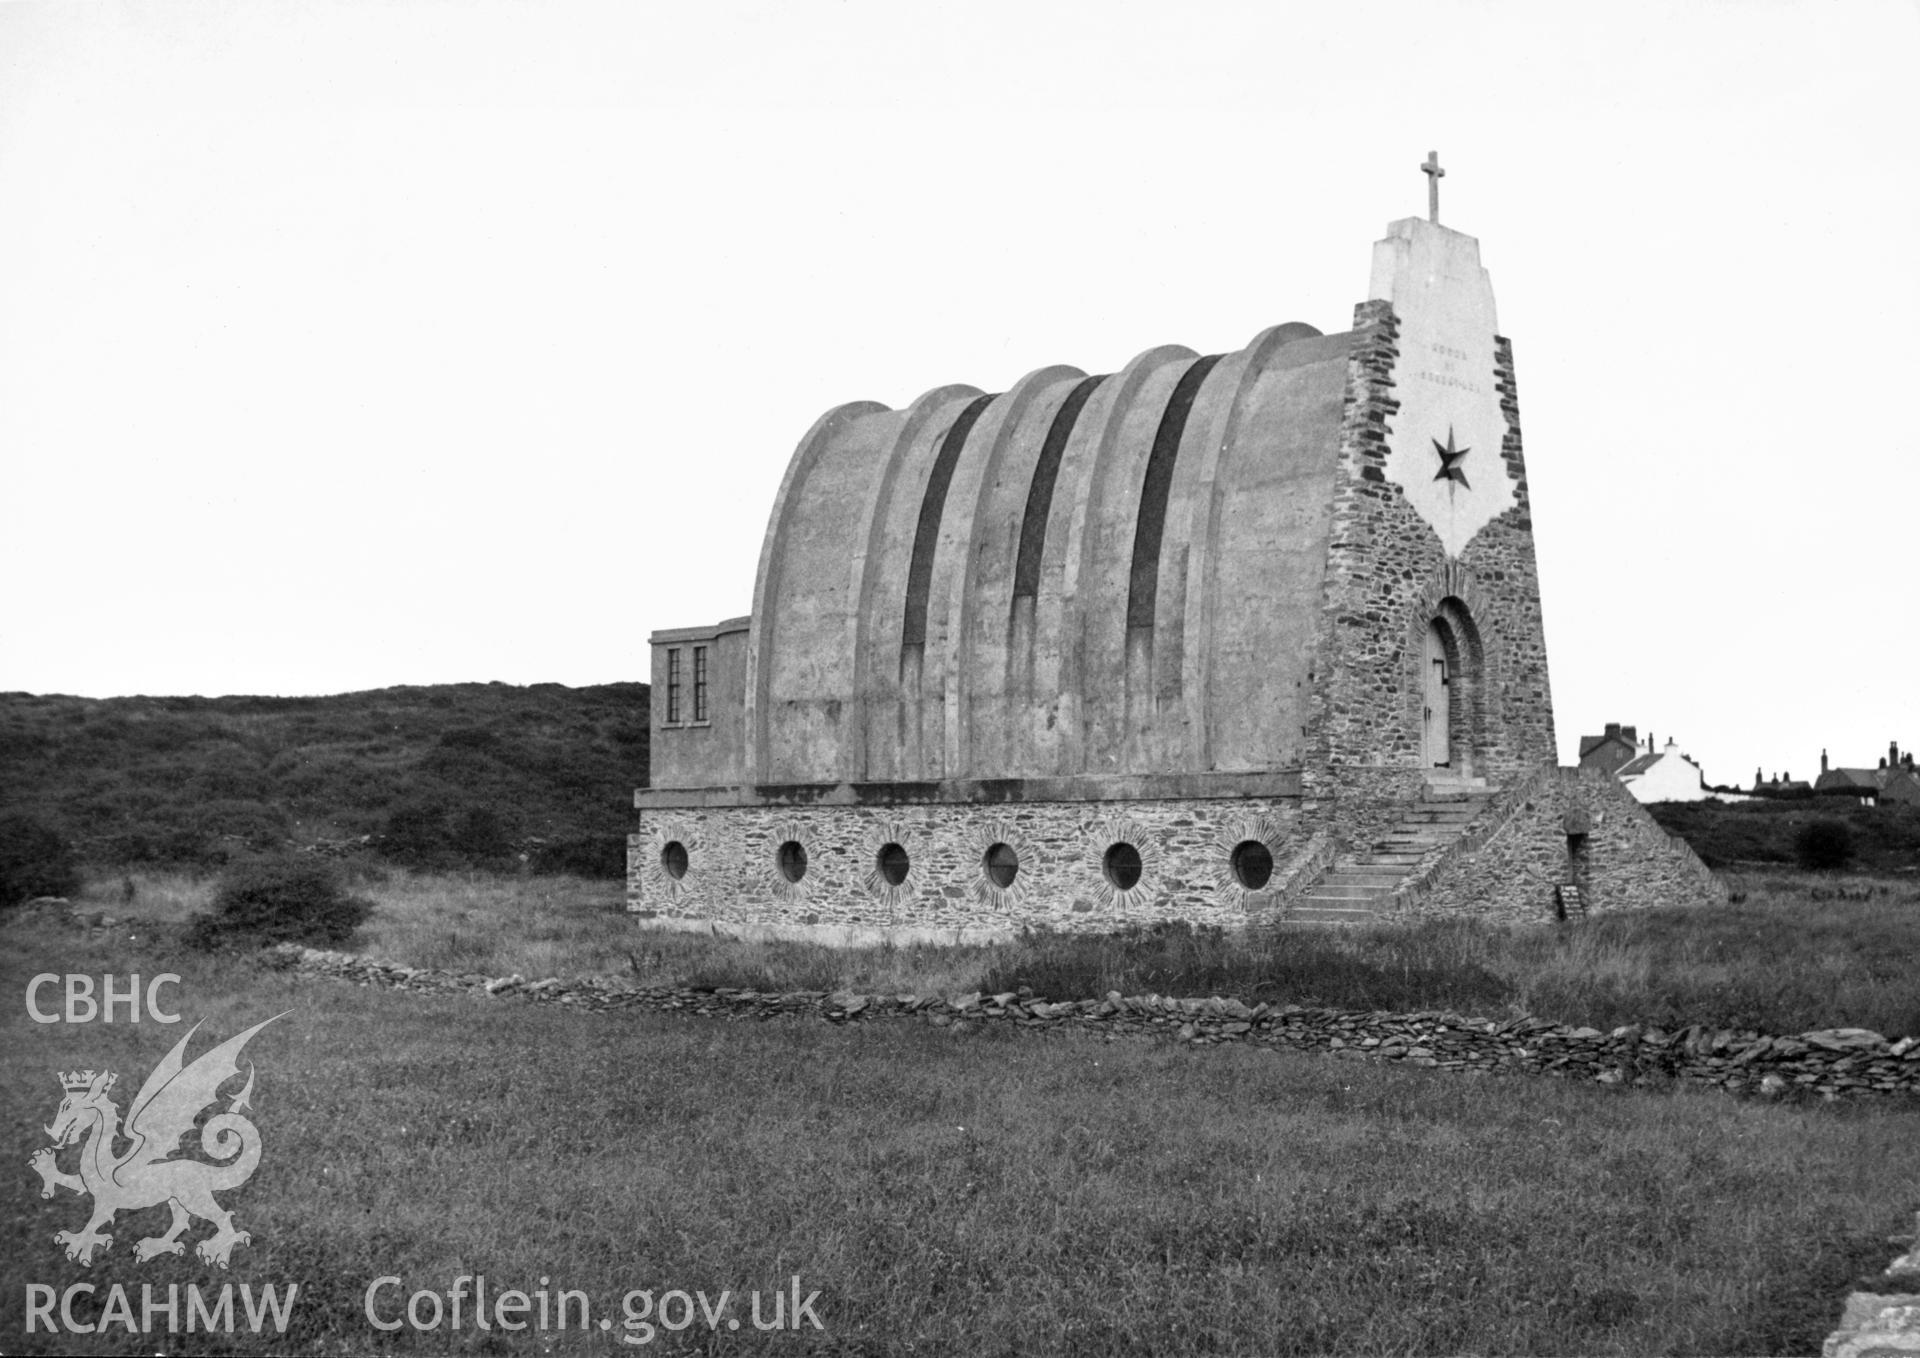 View of Our Lady Star of the Sea catholic church, Amlwch taken in 1947. The church was designed in c1939 by Guiseppe Rinvolucri, an Italian architect brought to Wales as a prisoner of war. He subsequently married a local woman, and lived and worked in north Wales, specialising in Roman Catholic churches. He also designed a number of other churches in Wales, including those at Abergele, and Porthmadog.